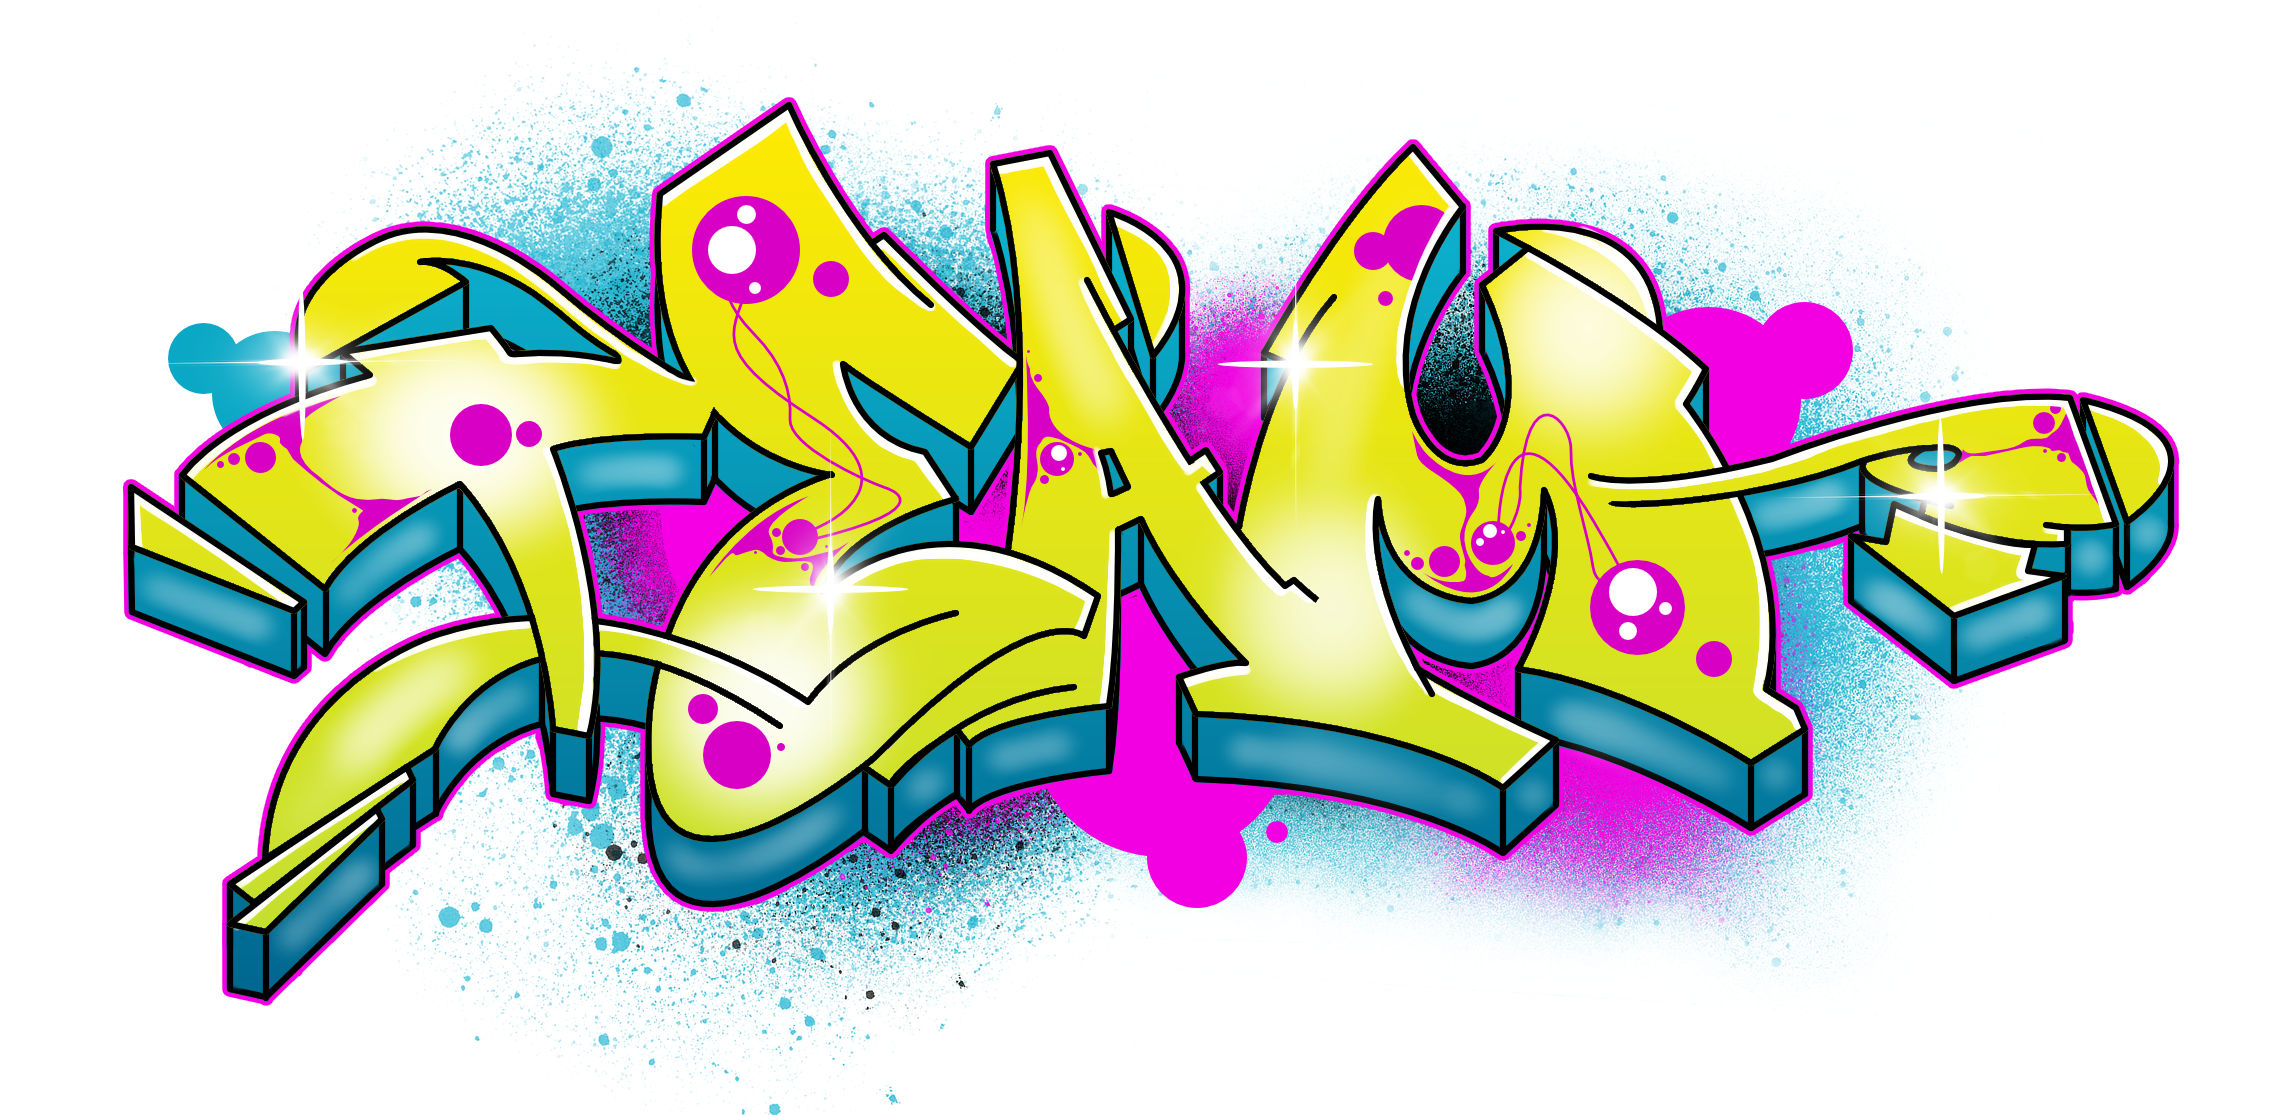 How to Draw “Team” in Graffiti in 15 Steps